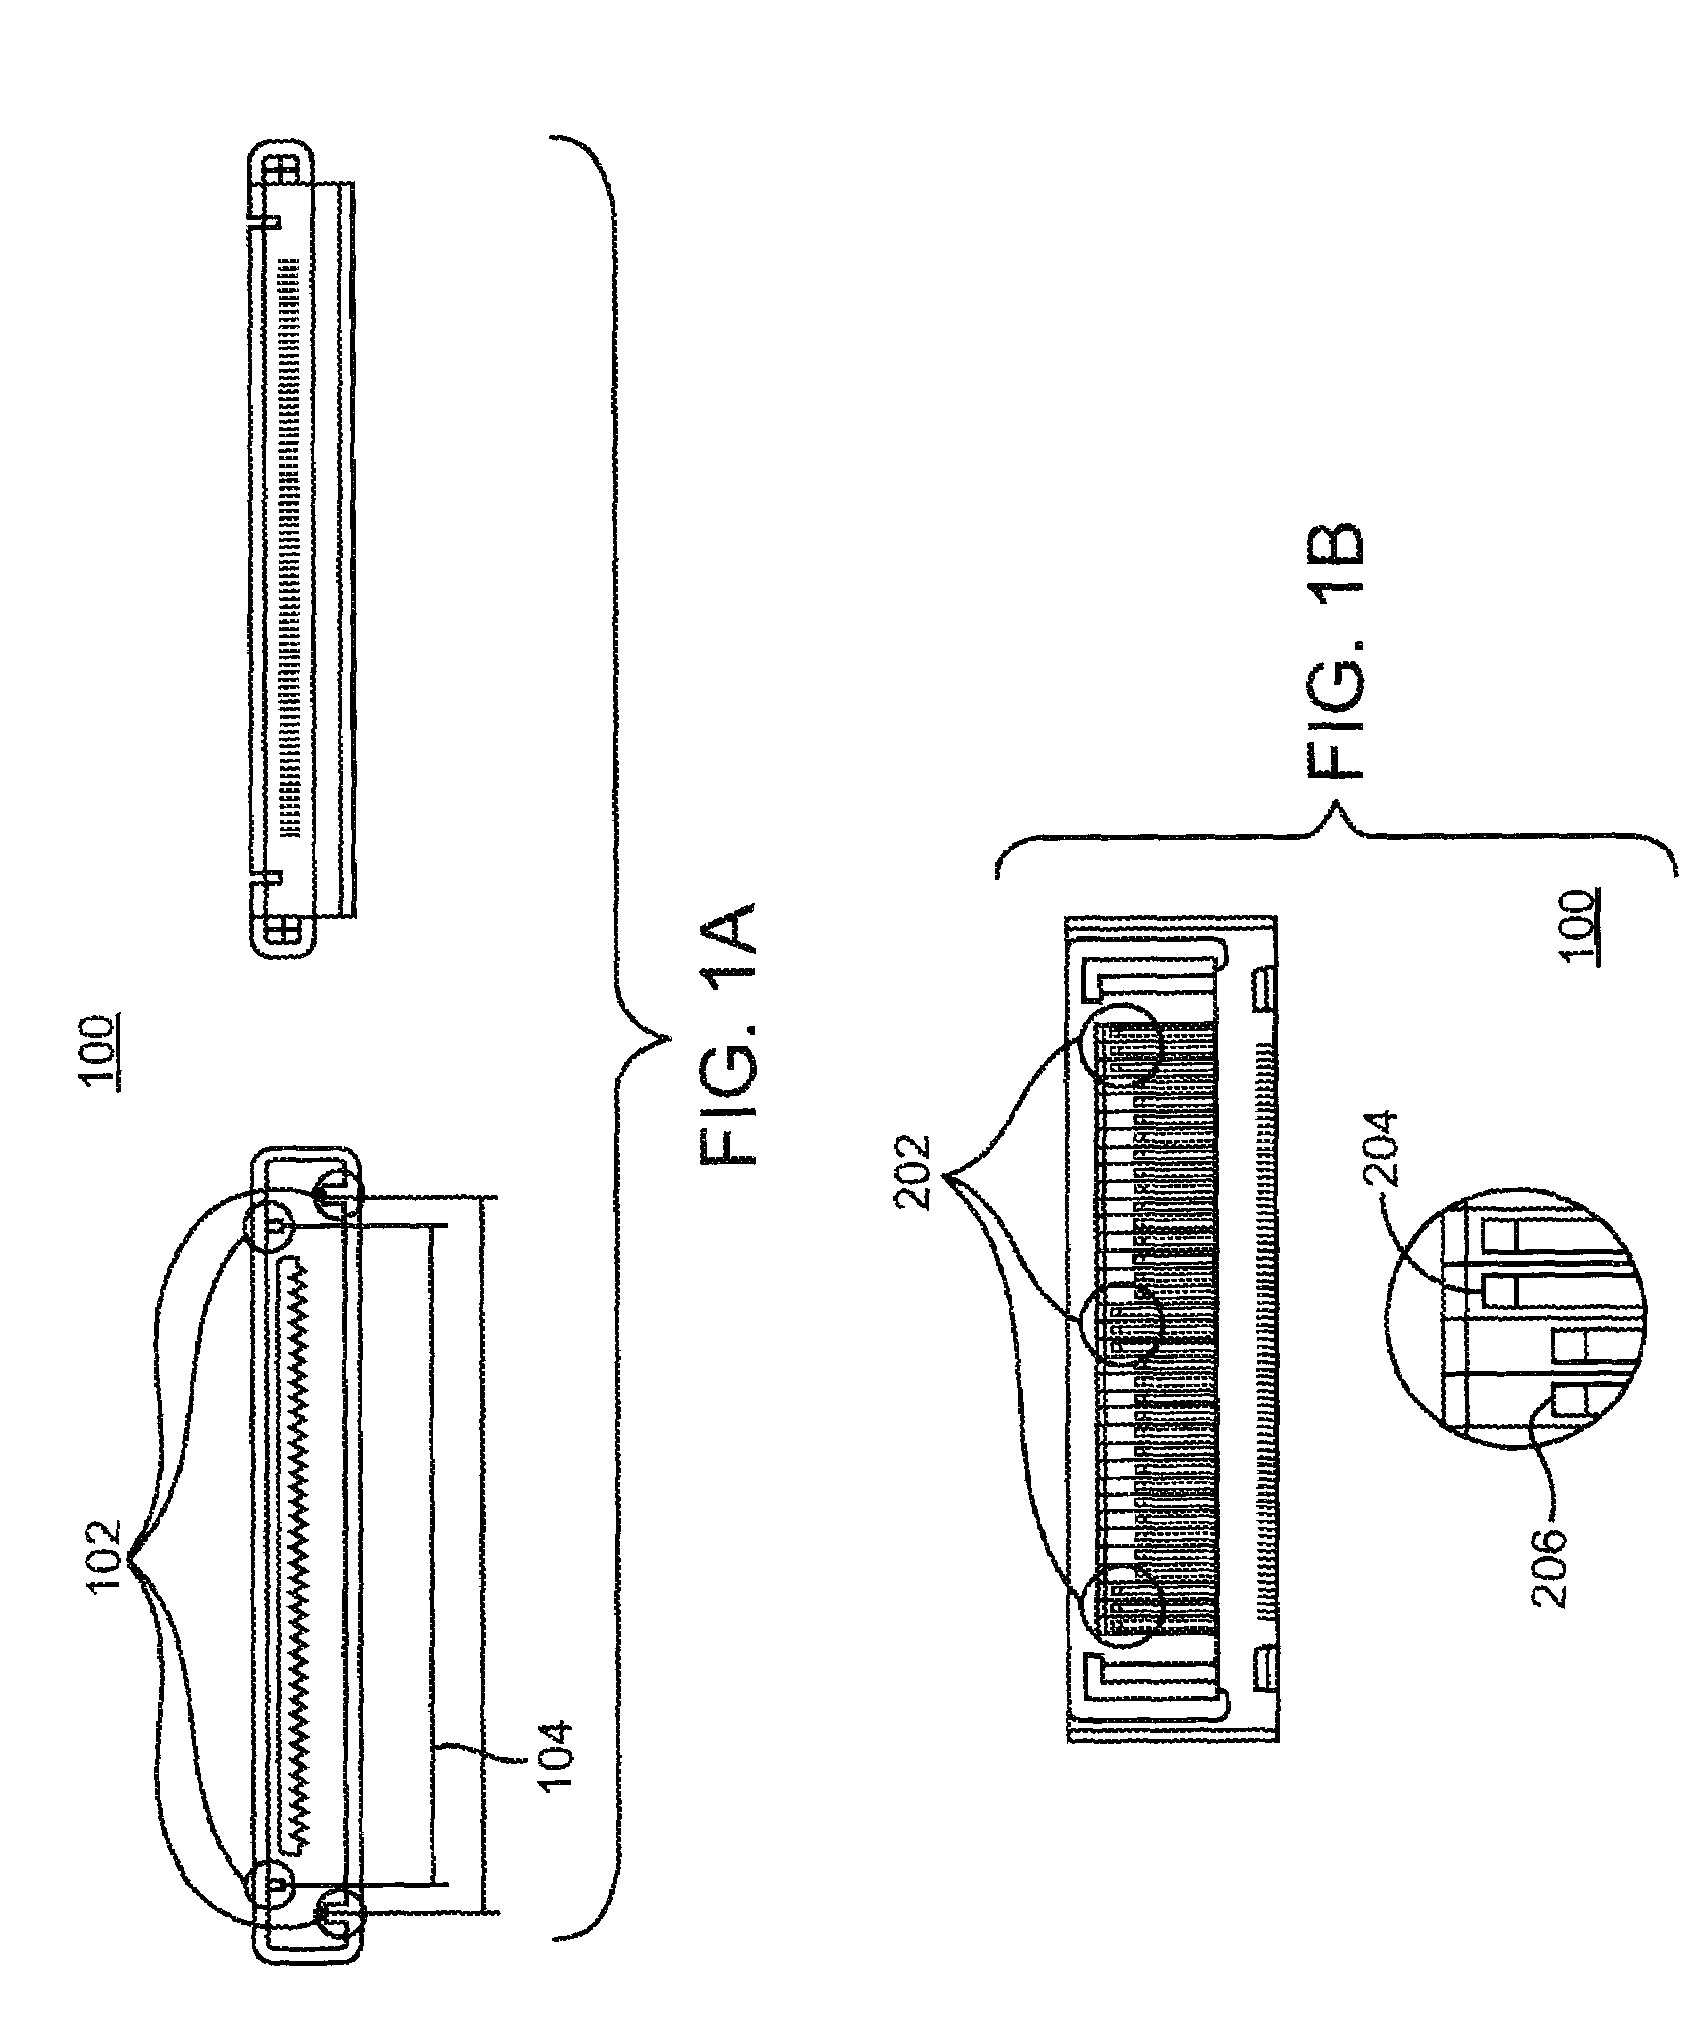 Method and system for transferring status information between a media player and an accessory